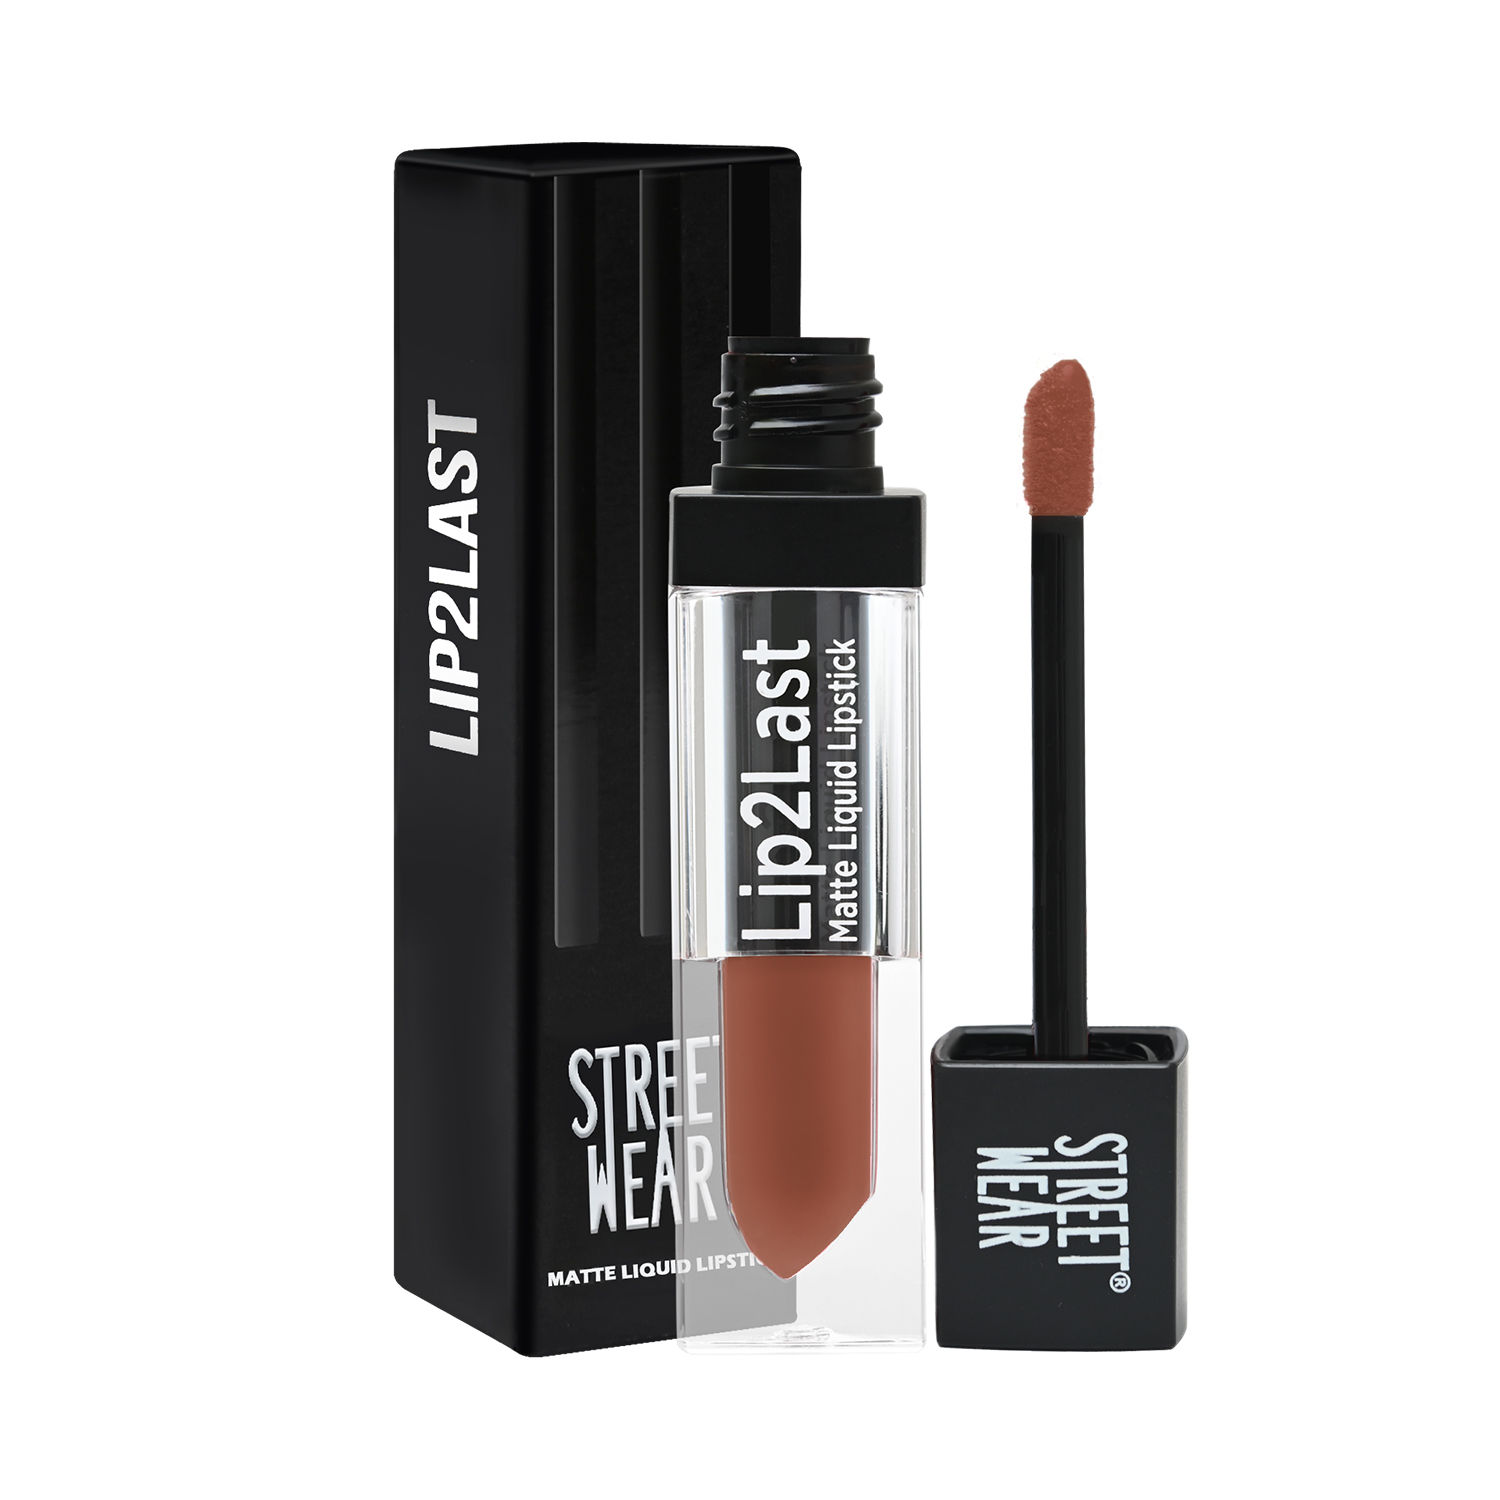 Buy STREET WEAR® Lip2Last -Freaking Chocolate (Brown) - 5 ml Matte Liquid Lipstick, Transferproof, Featherweight Formulation, Enriched With Vitamin E - Lasts AM To PM! - Purplle